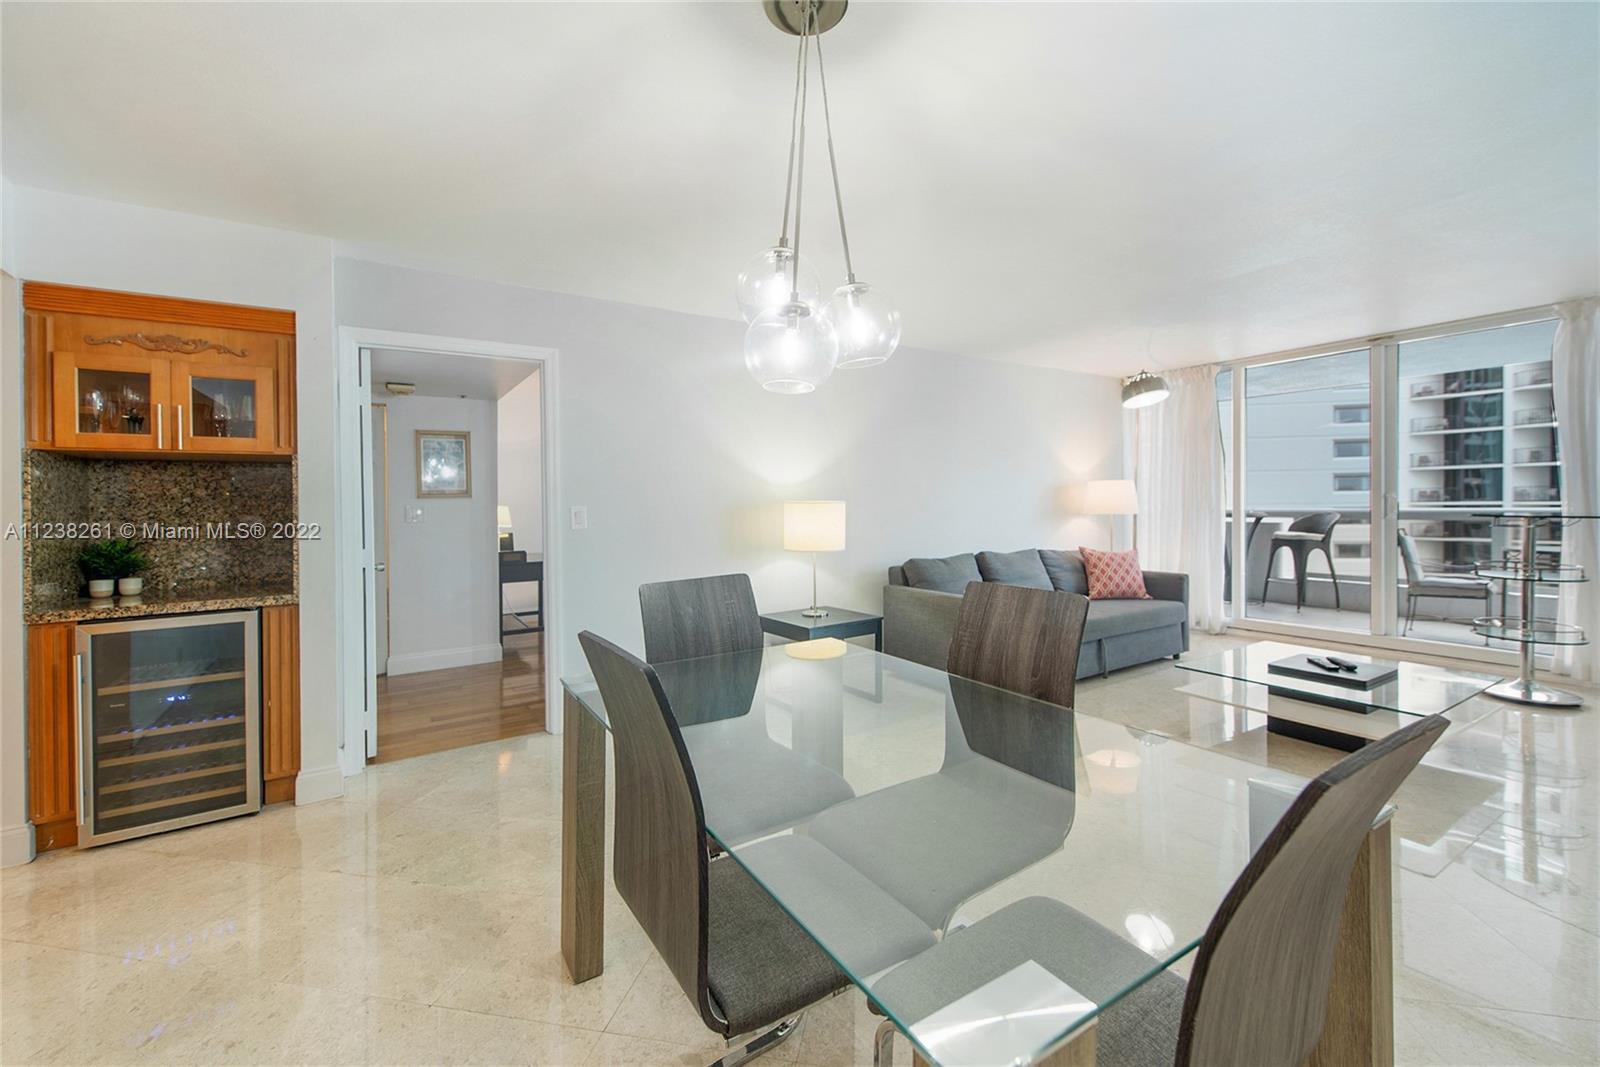 Gorgeous 1 Bed 1.5 Bath remodeled condo at The Grand. Beautiful views of Biscayne Bay and Downtown f